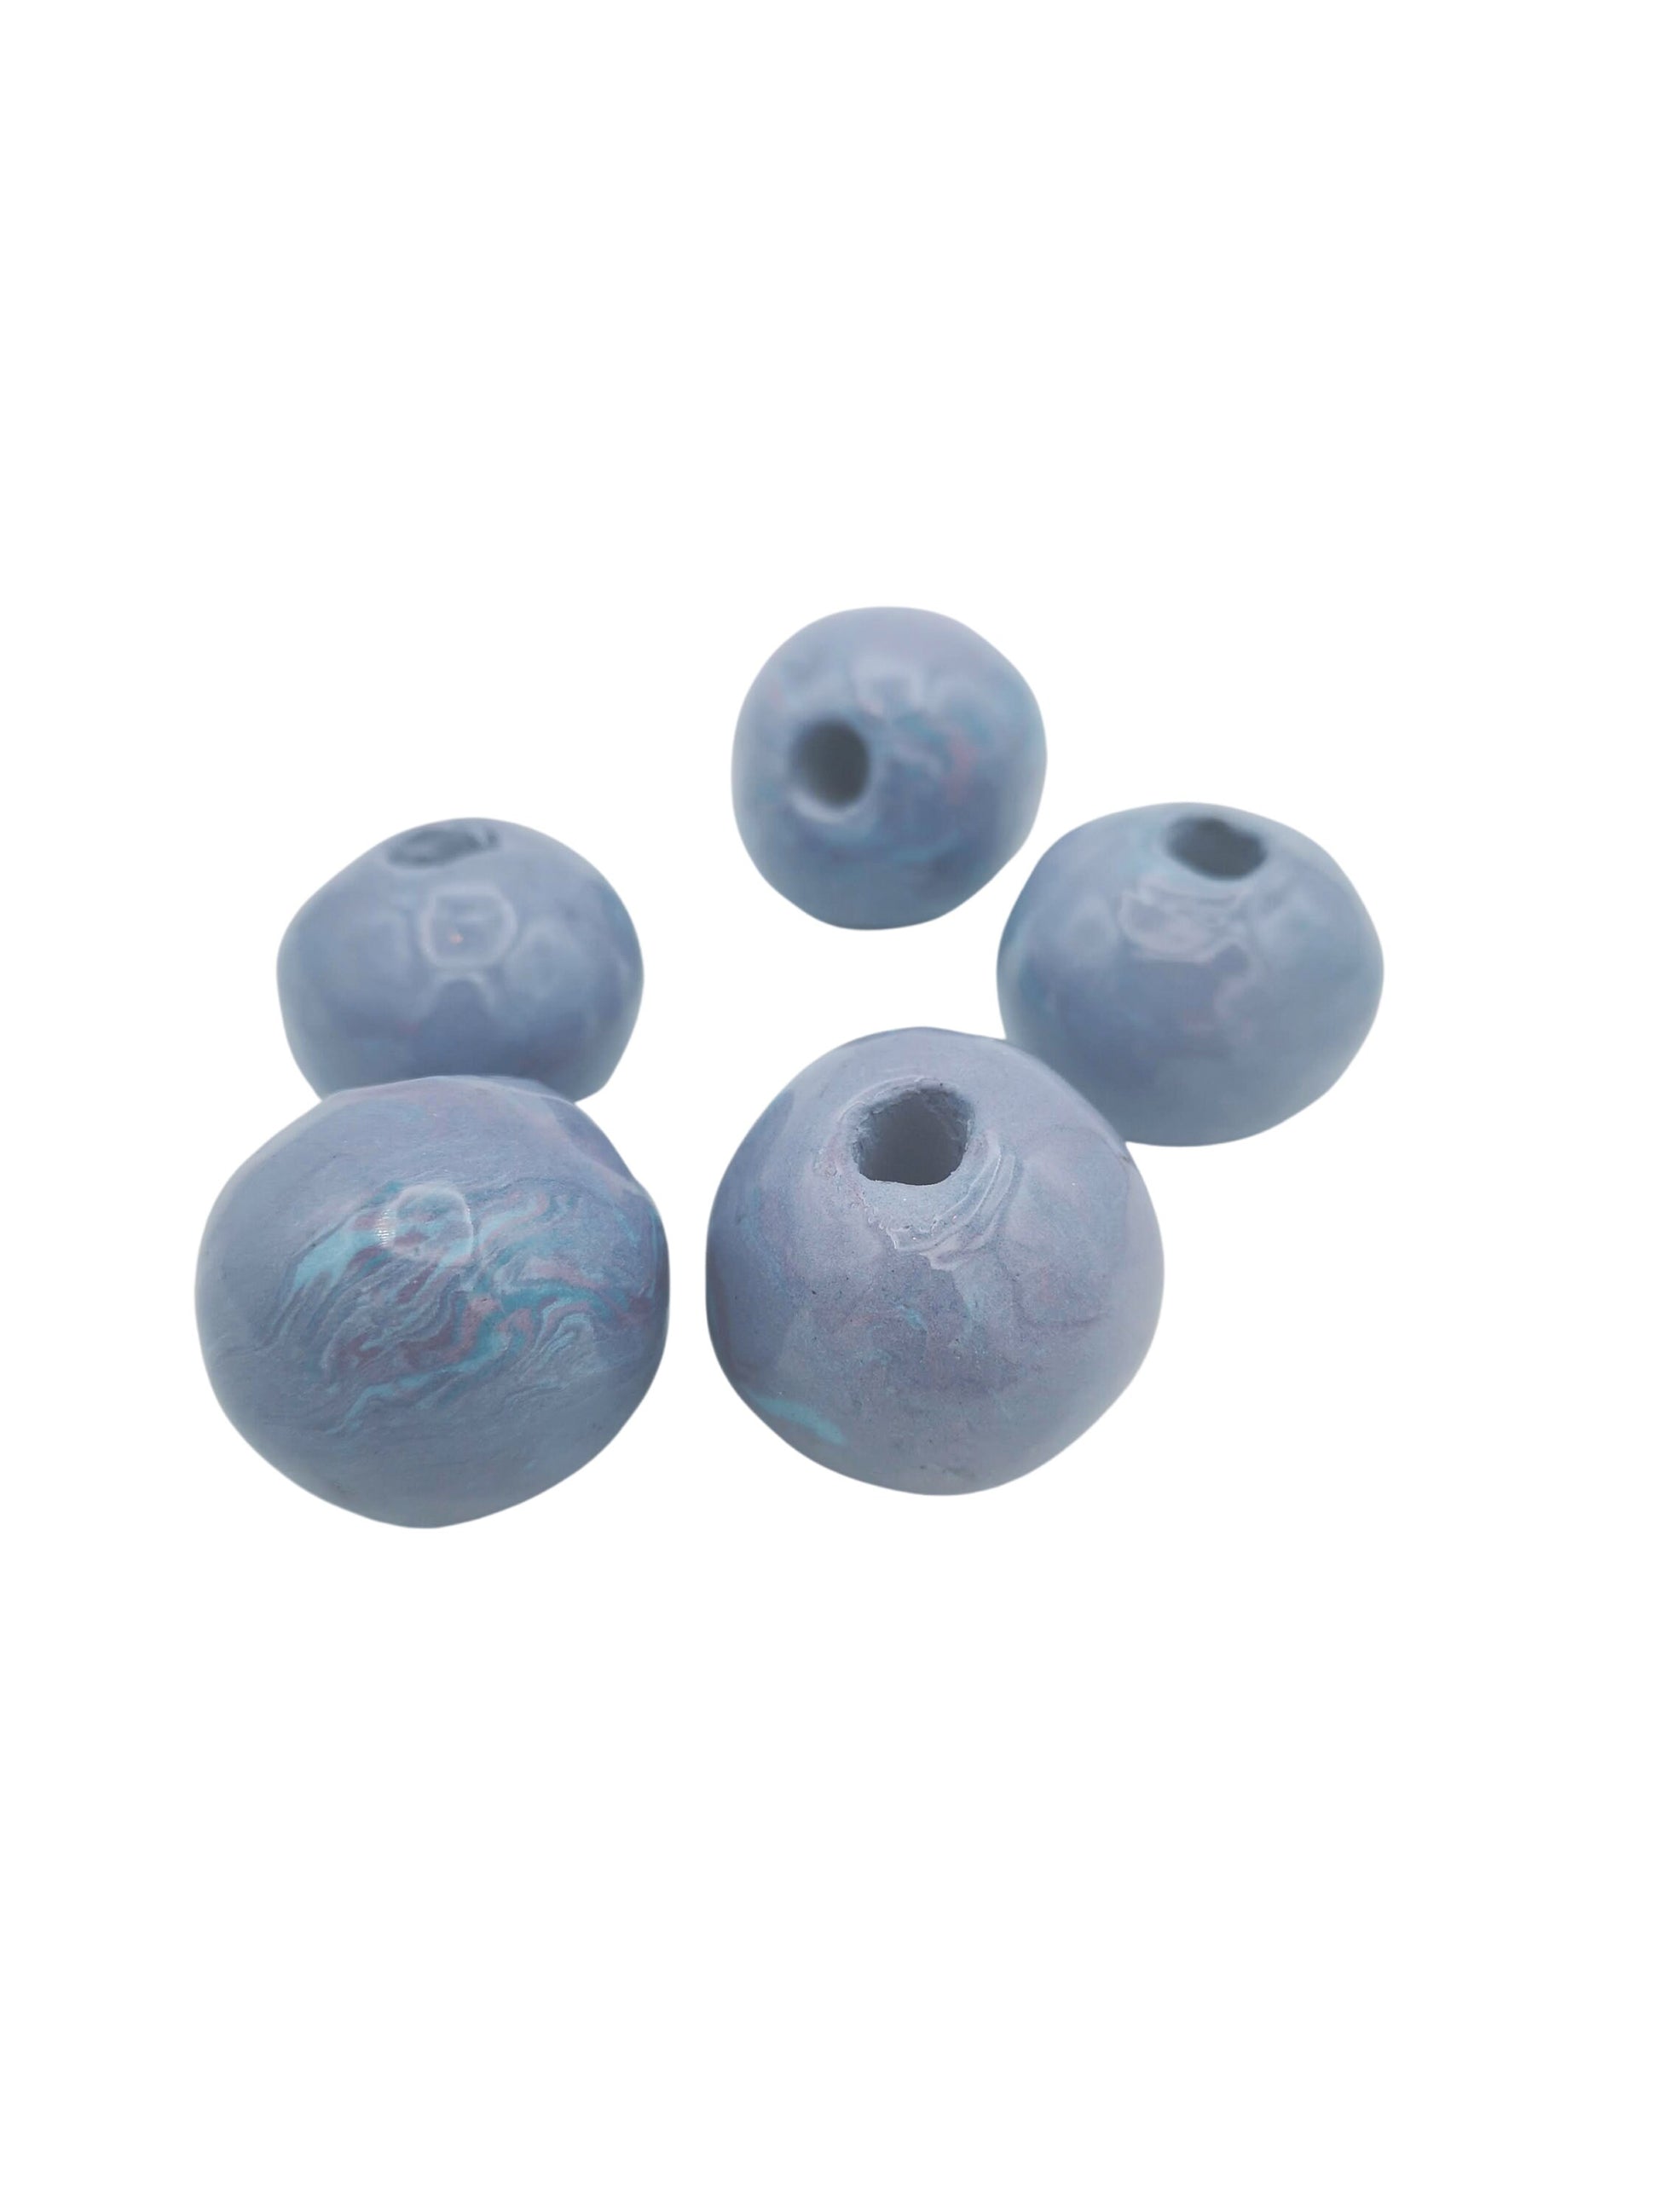 1Pc 30mm Extra Large Bead For Macrame, Marbled Handmade Ceramic 7mm Large Hole Beads For Chunky Jewelry Making, Unique Purple And Blue Beads - Ceramica Ana Rafael